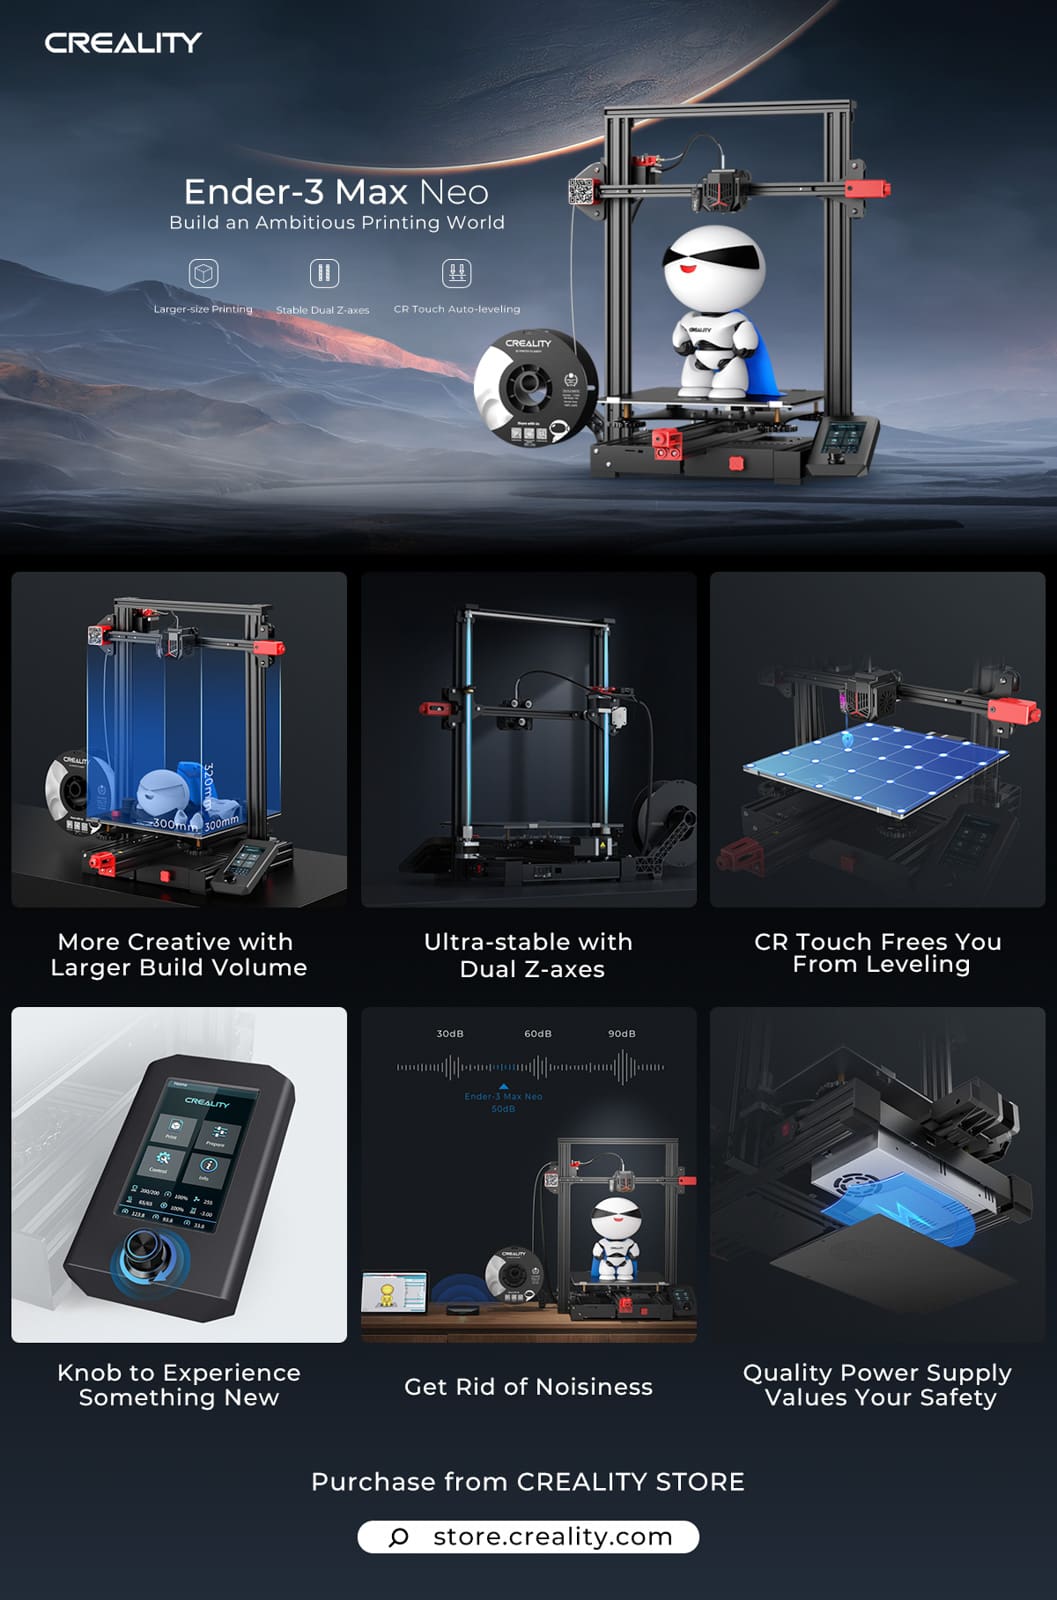 An overview of the Ender-3 Max Neo features